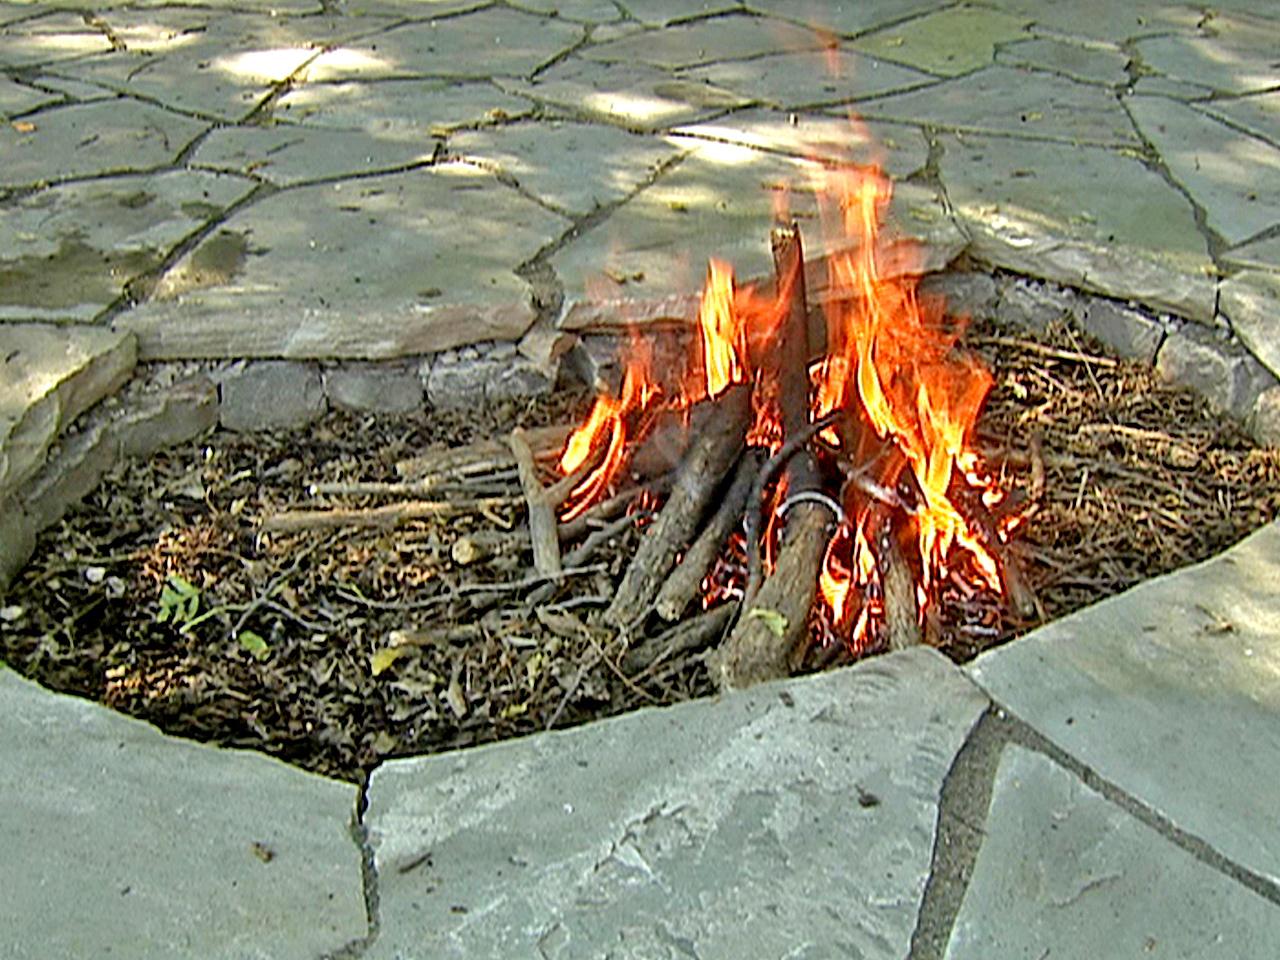 Outdoor Fire Pits And Pit Safety, Wood Burning Fire Pit Table Setup